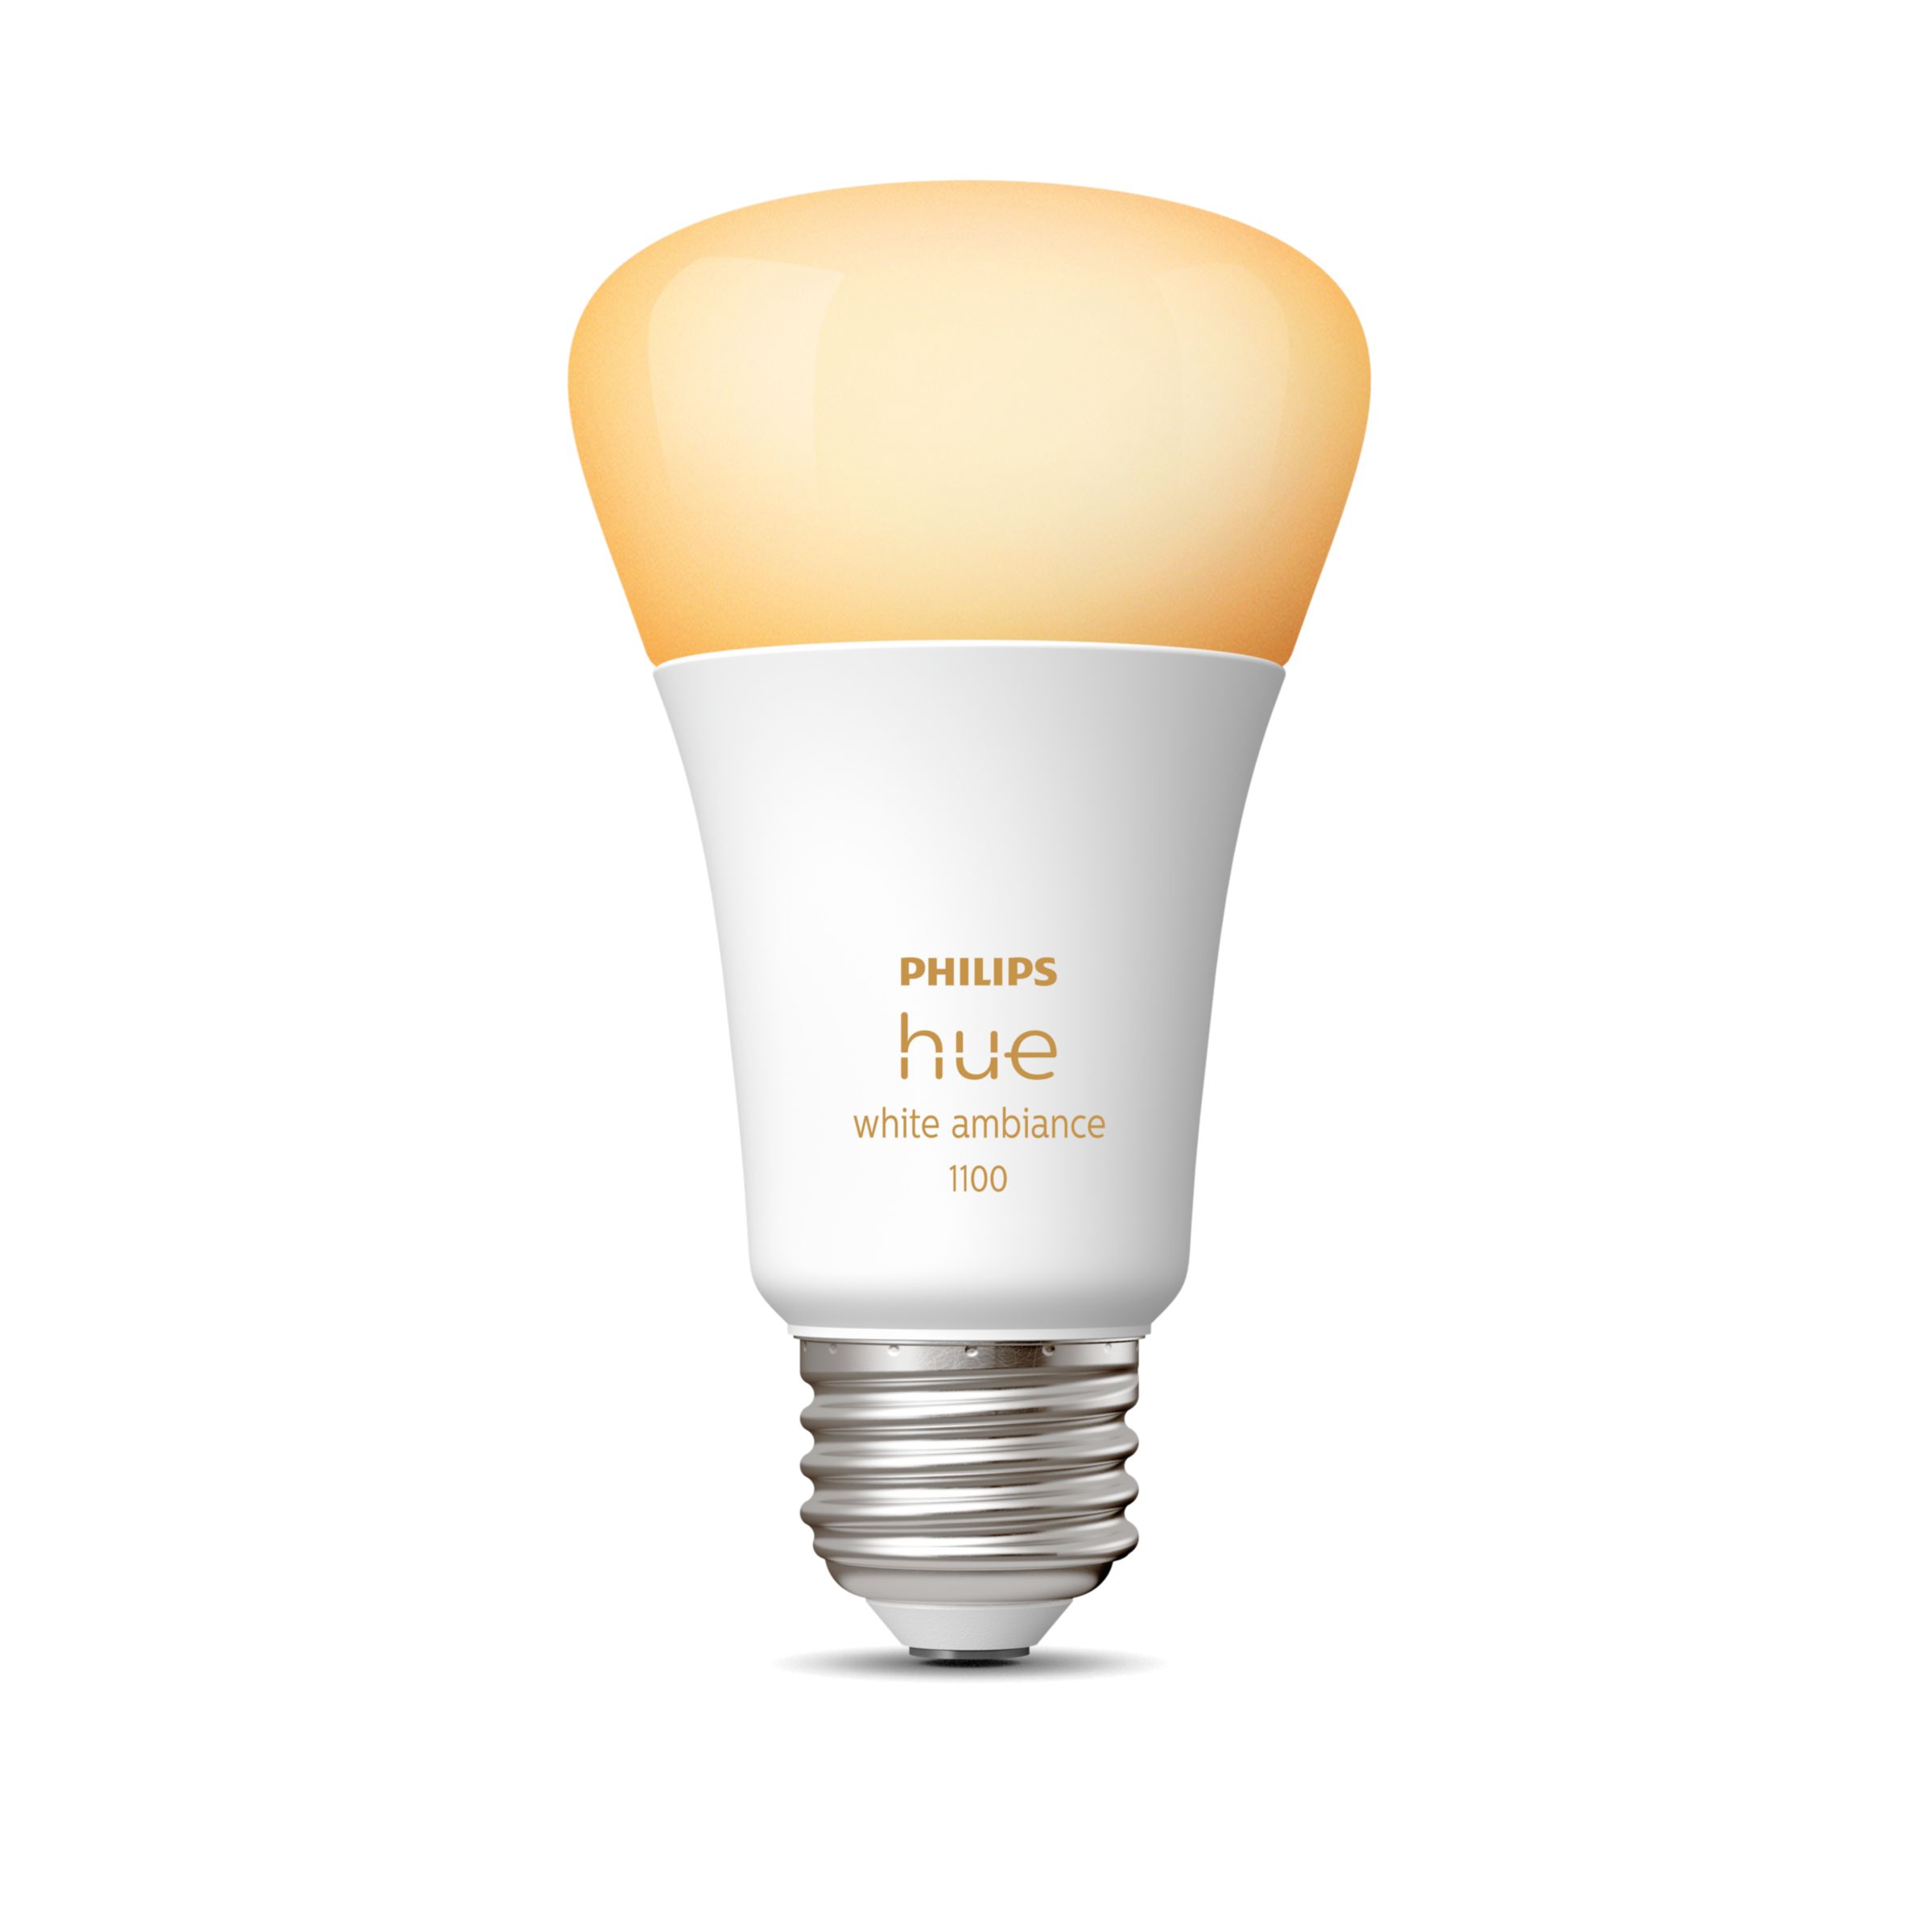 Philips Hue 4pk White And Color Ambiance A19 Led Smart Bulb Starter Kit :  Target